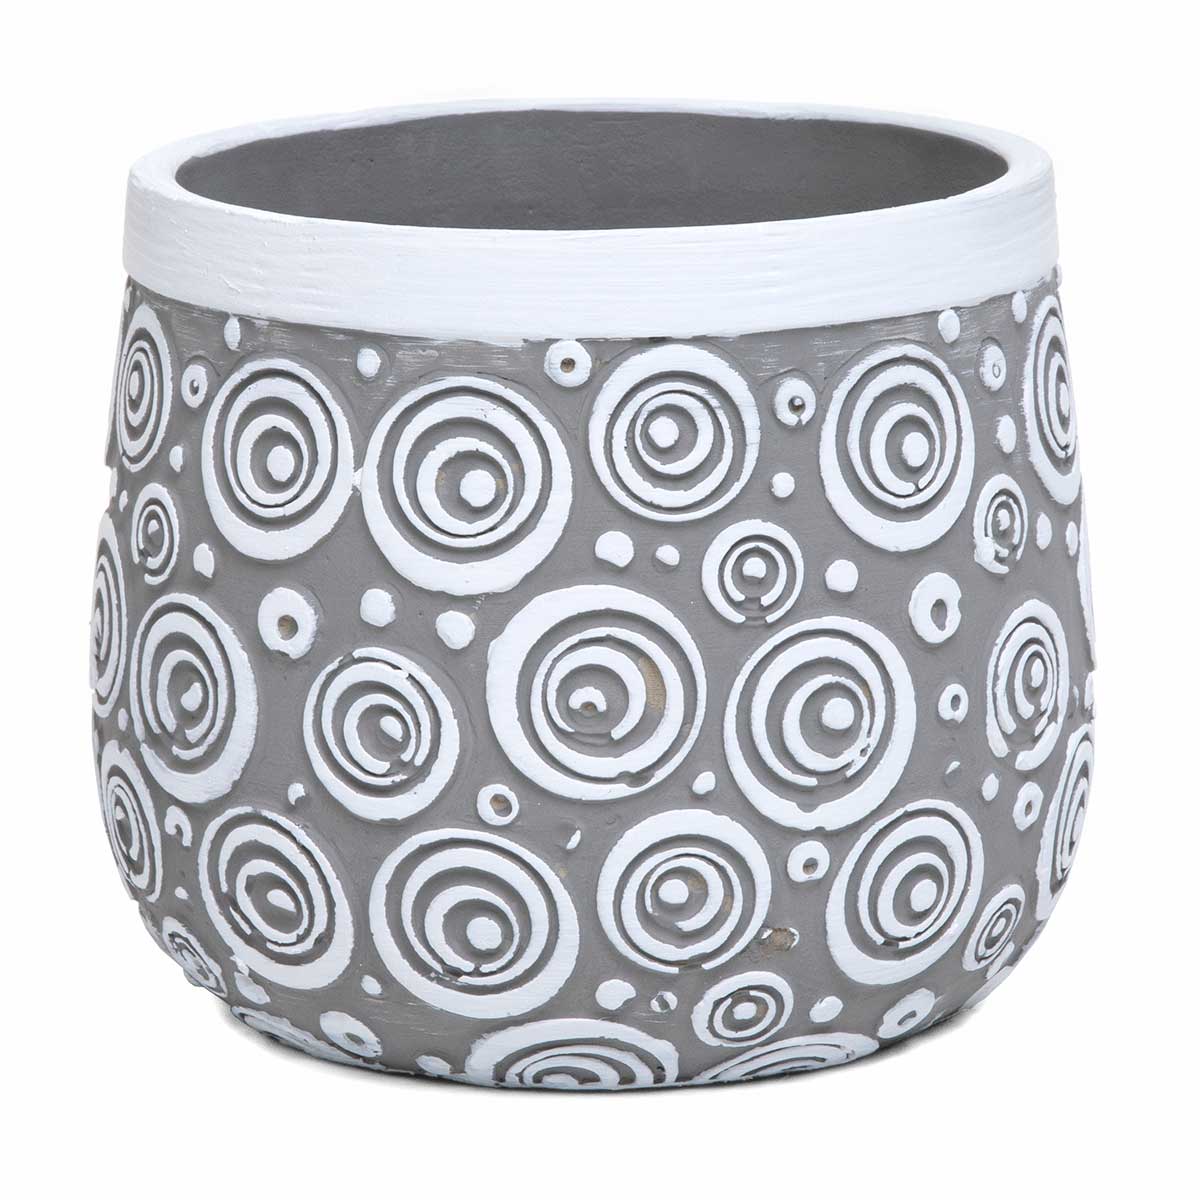 POT SWIRL ROUND GREY LARGE 7IN X 6IN WHITE CONCRETE - Click Image to Close